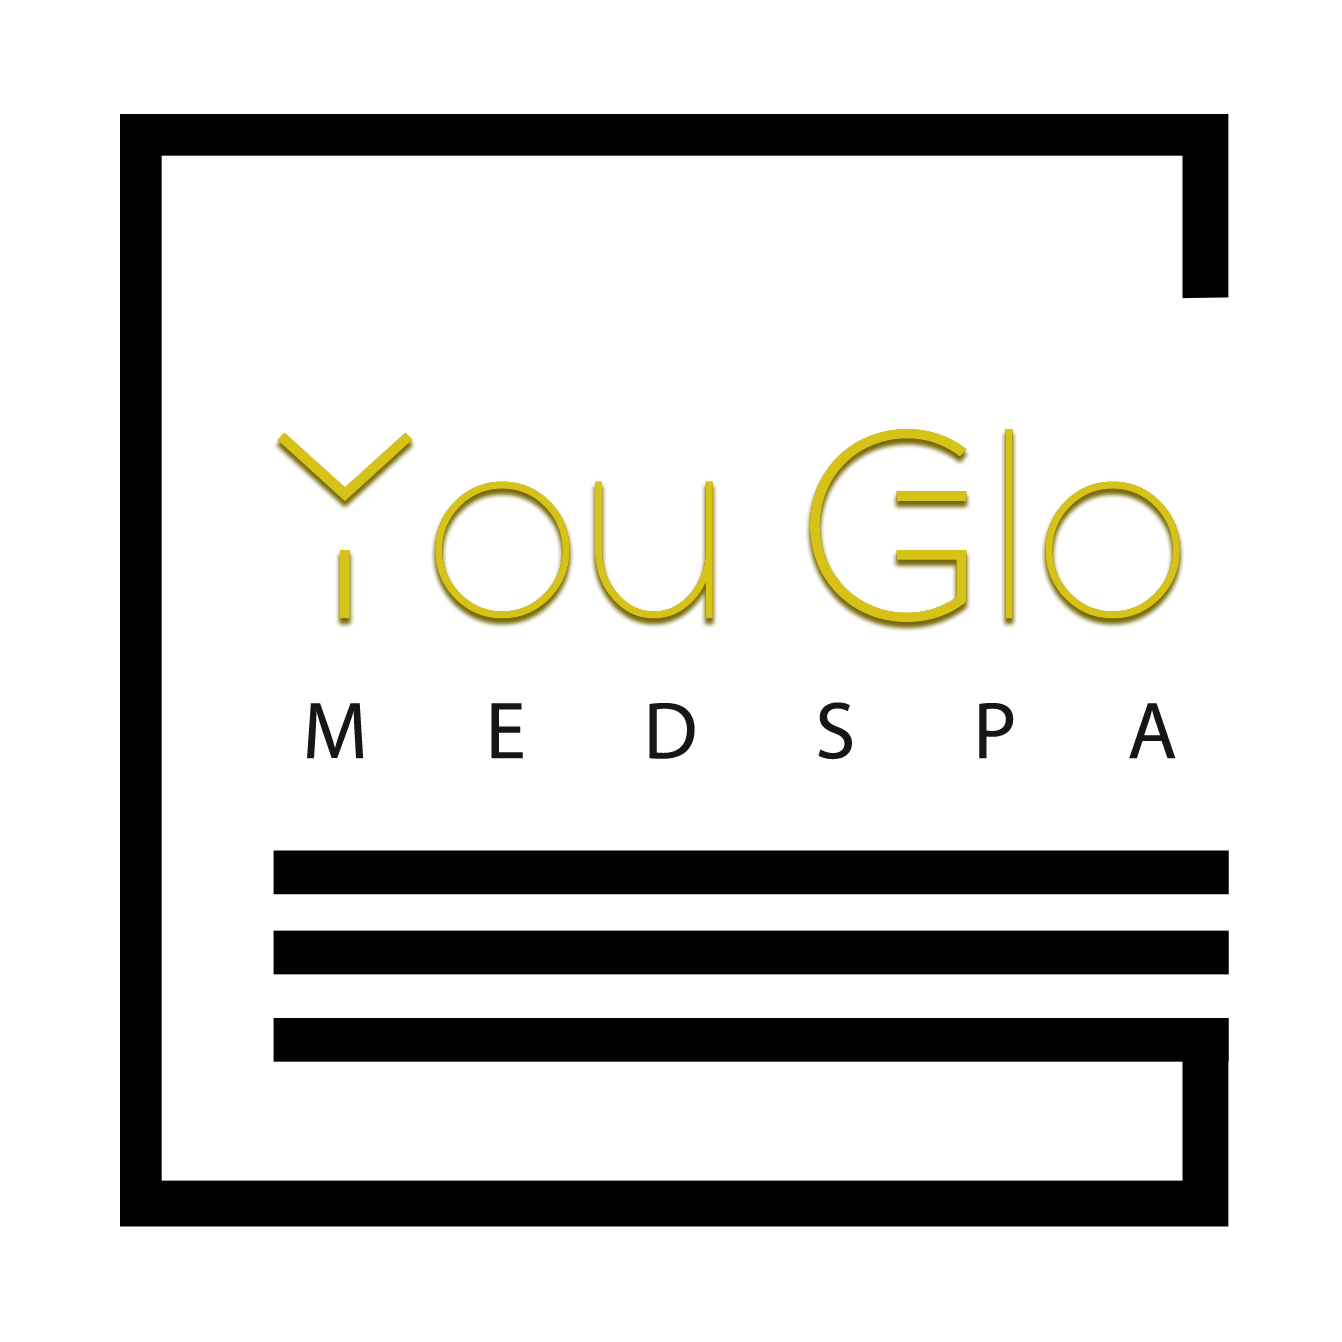 You Glo Med Spa - Houston, TX 77040 - (713)842-7565 | ShowMeLocal.com